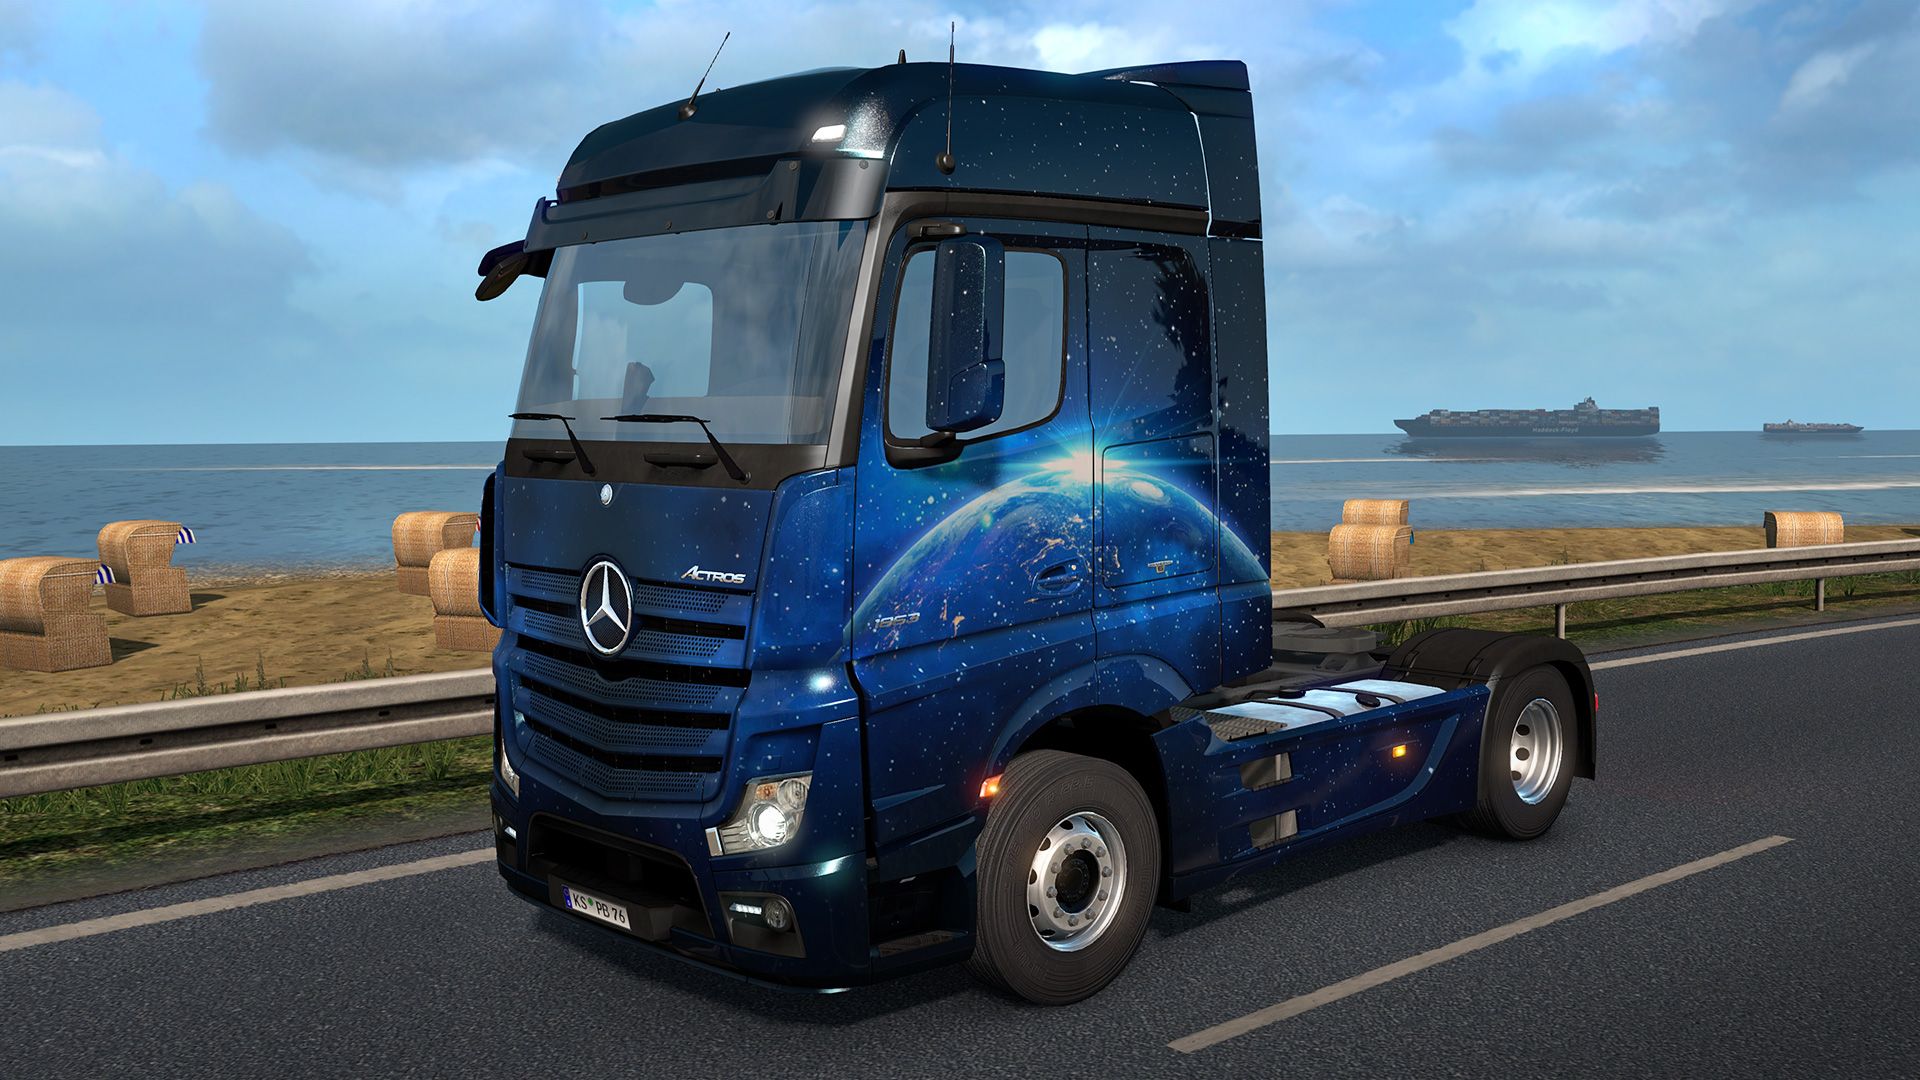 ETS2SPACE6